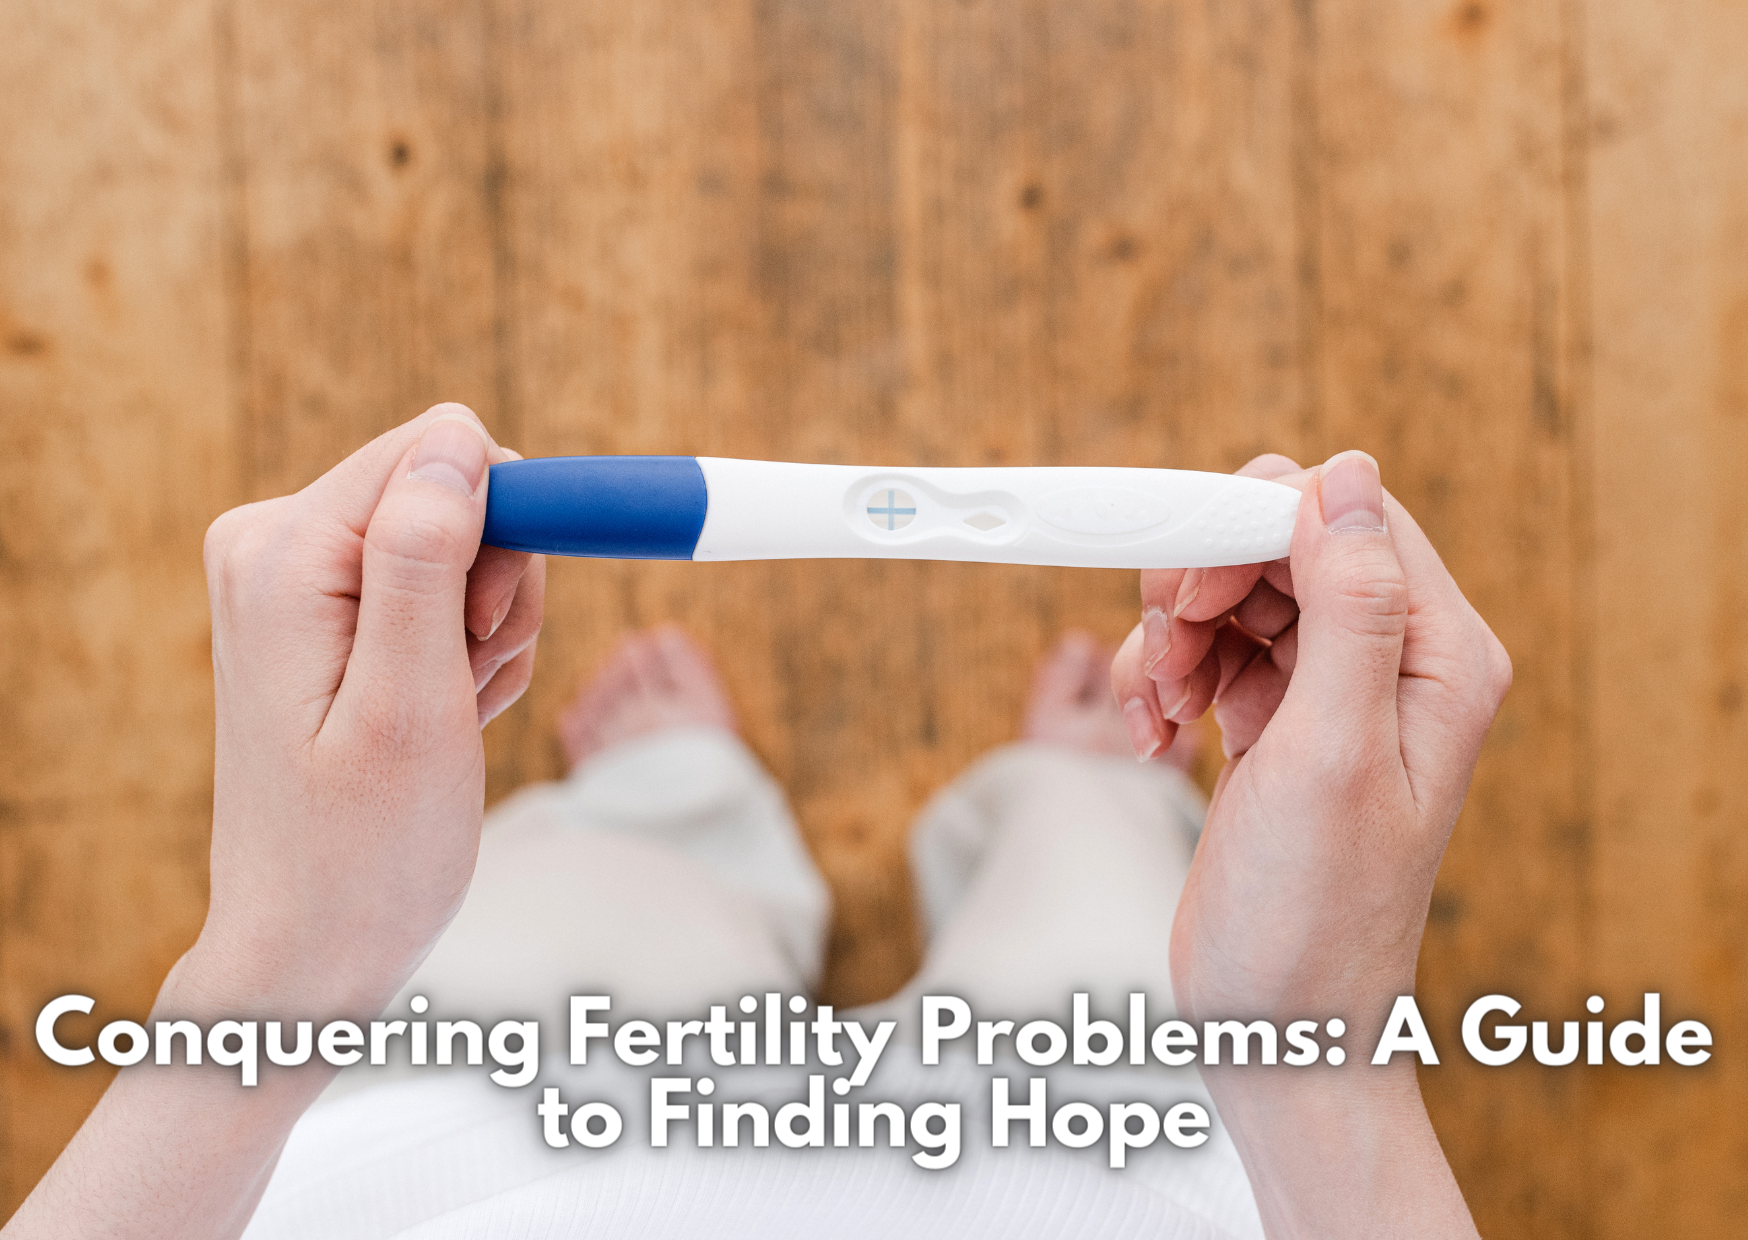 Conquering Fertility Problems: A Guide to Finding Hope